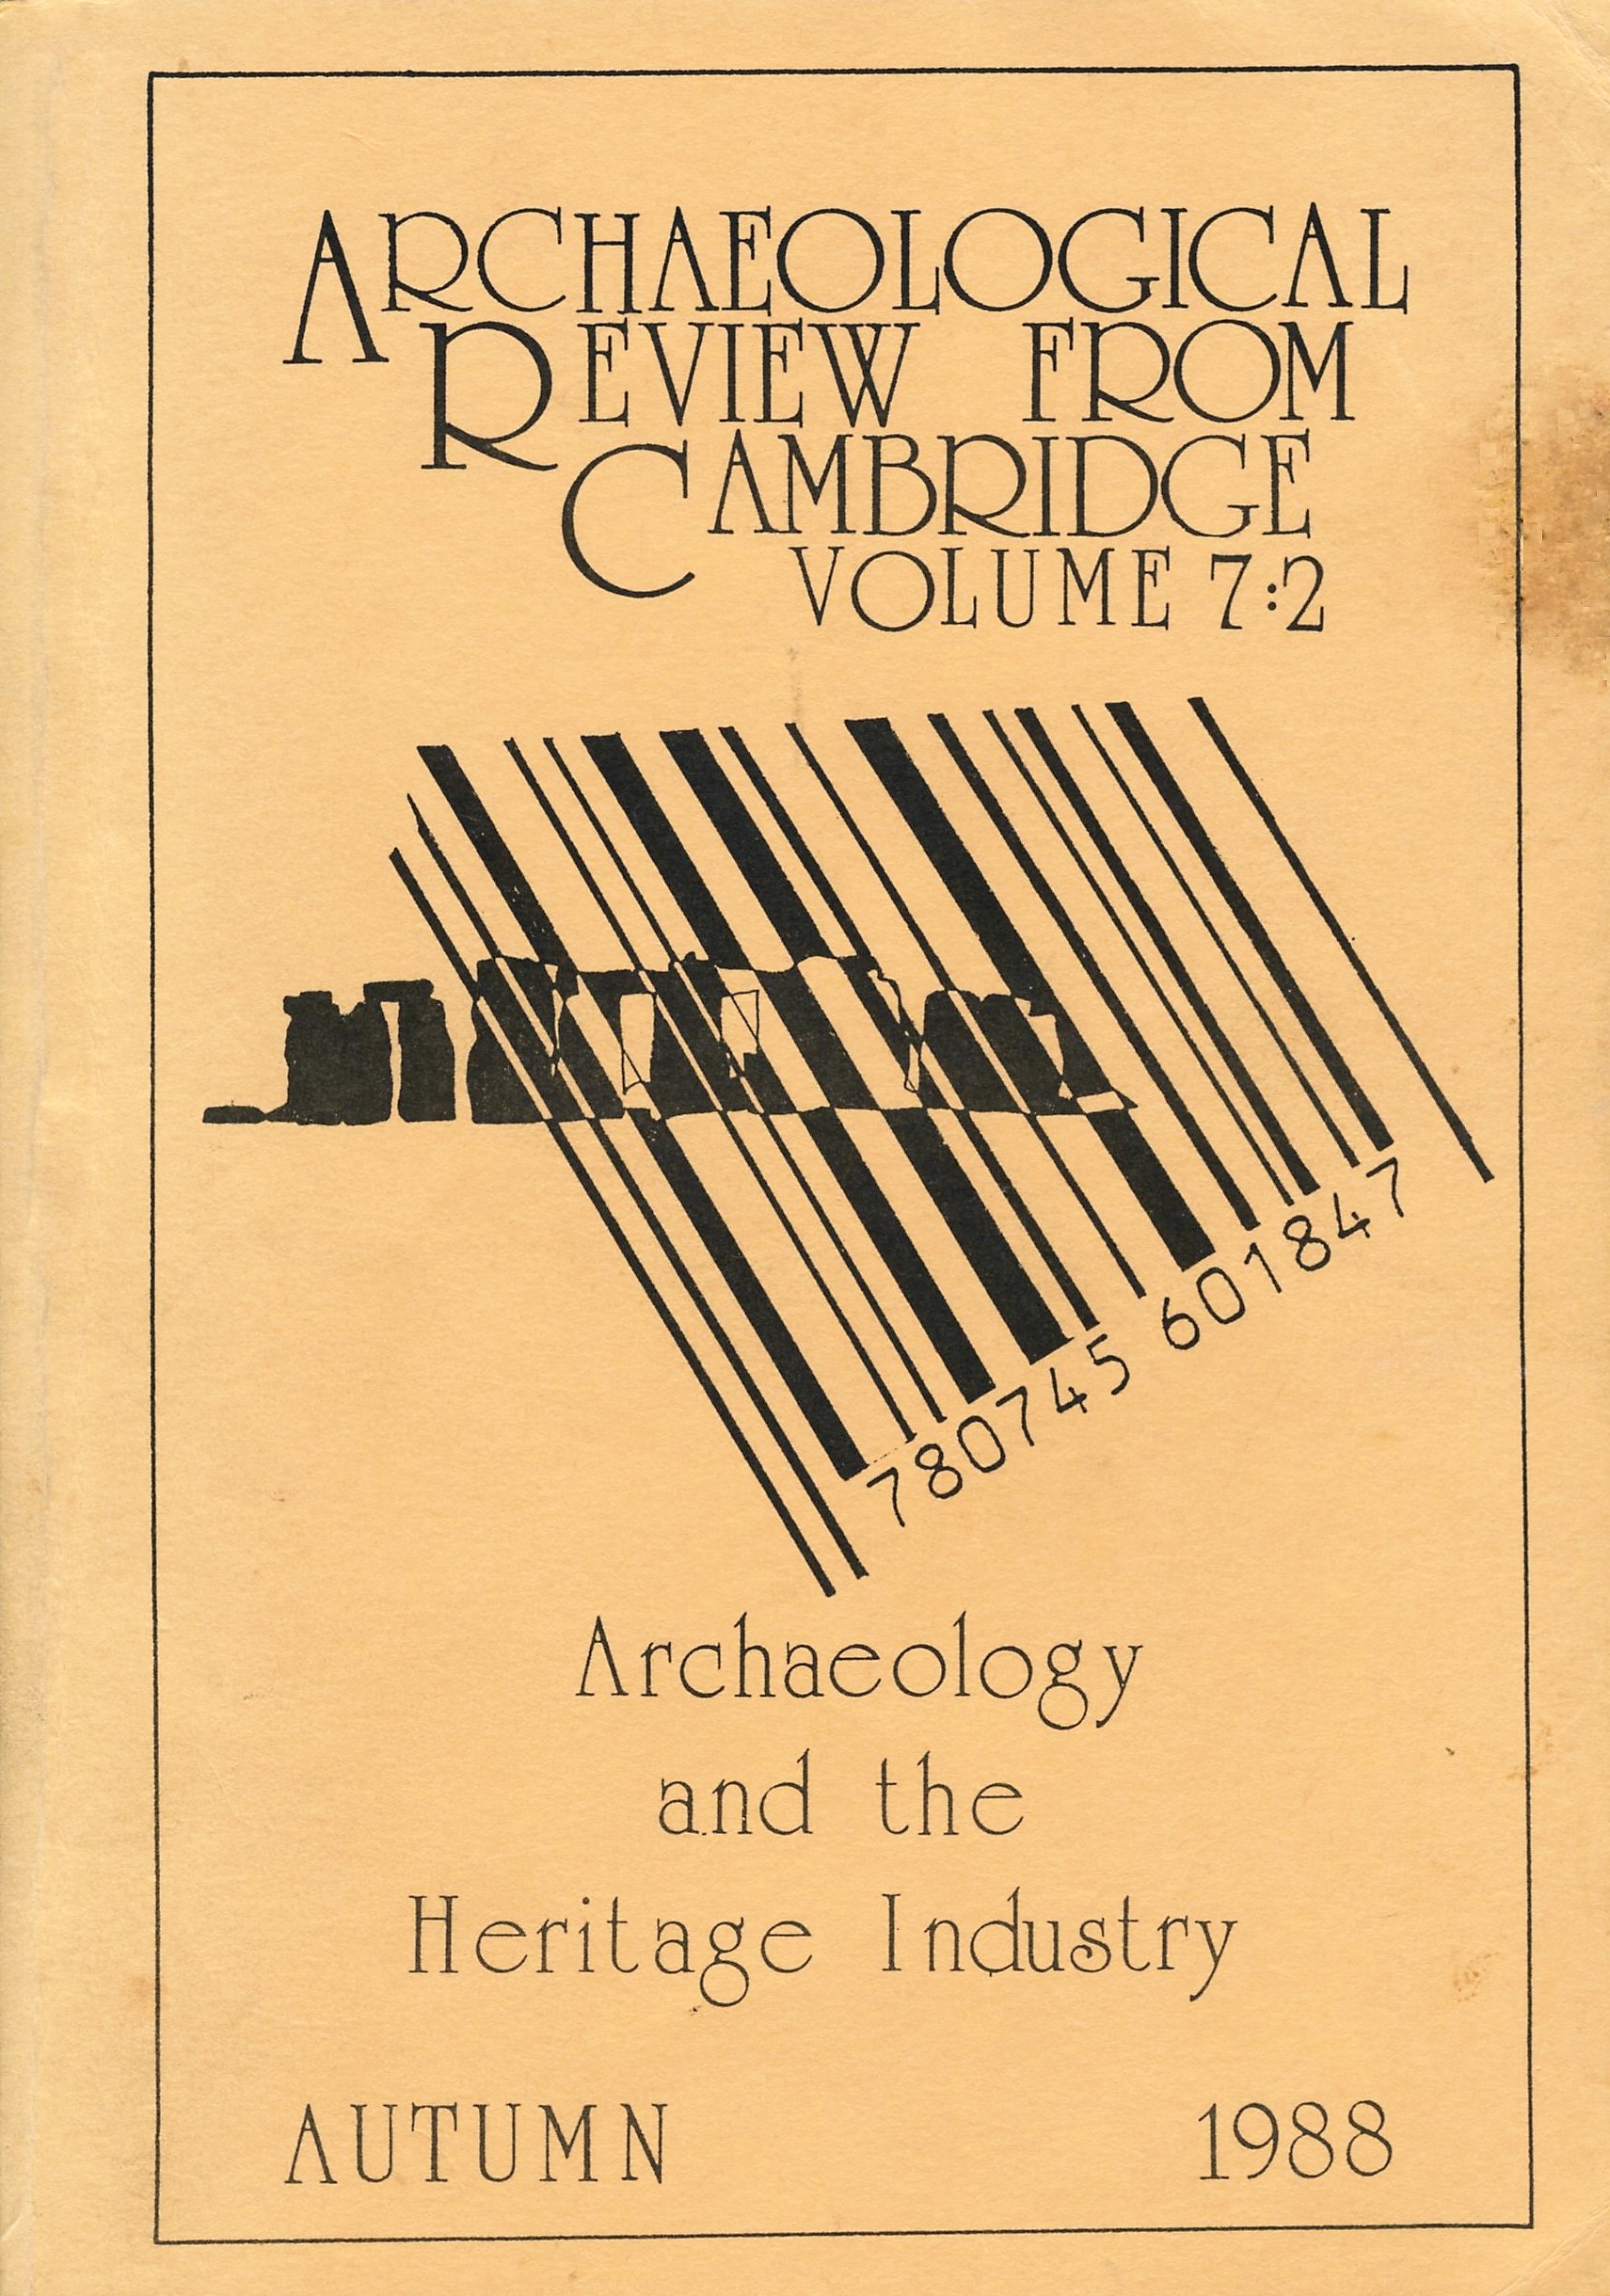 Archaeology and the Heritage Industry